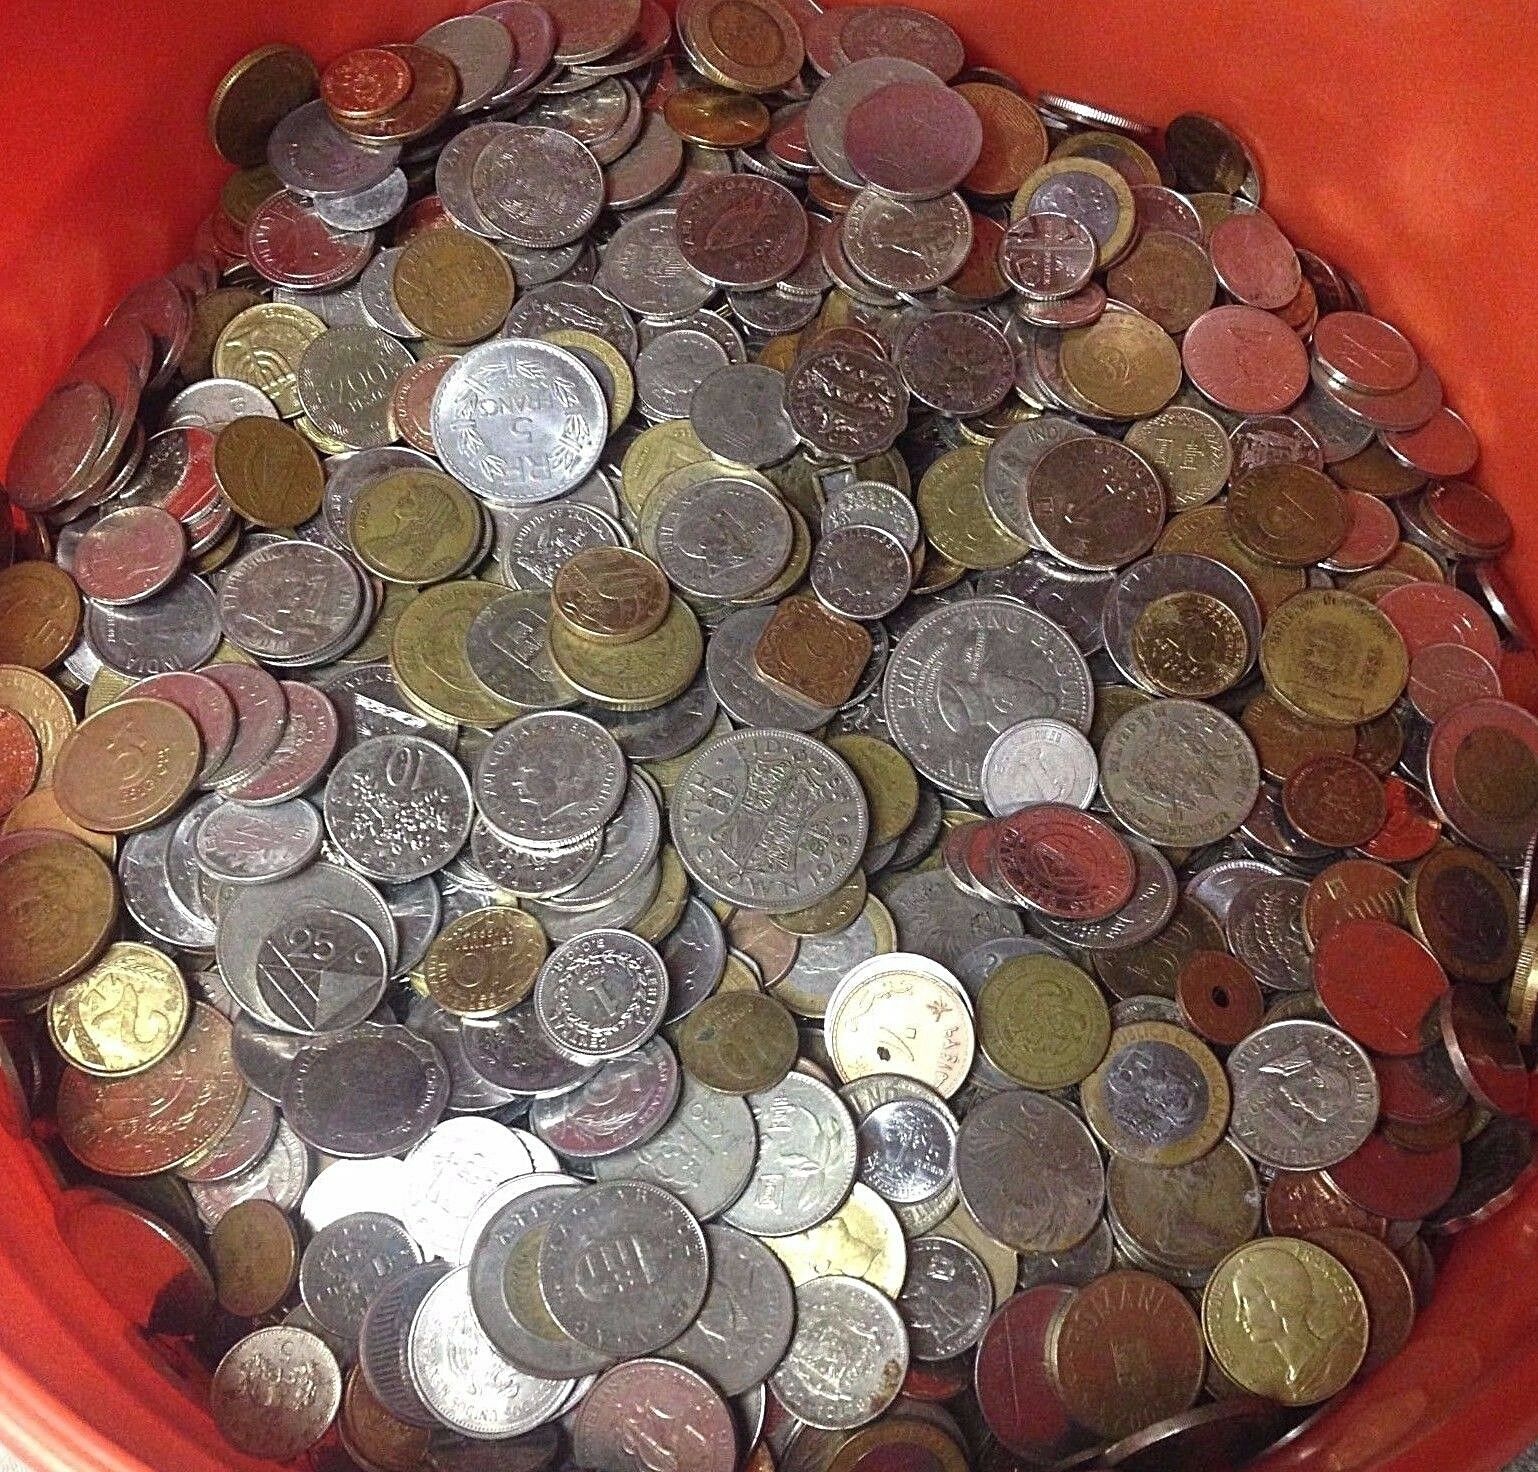 5 Lbs Of World Foreign Coins, Mixed Bulk Lots By The Pound! Many Countries!